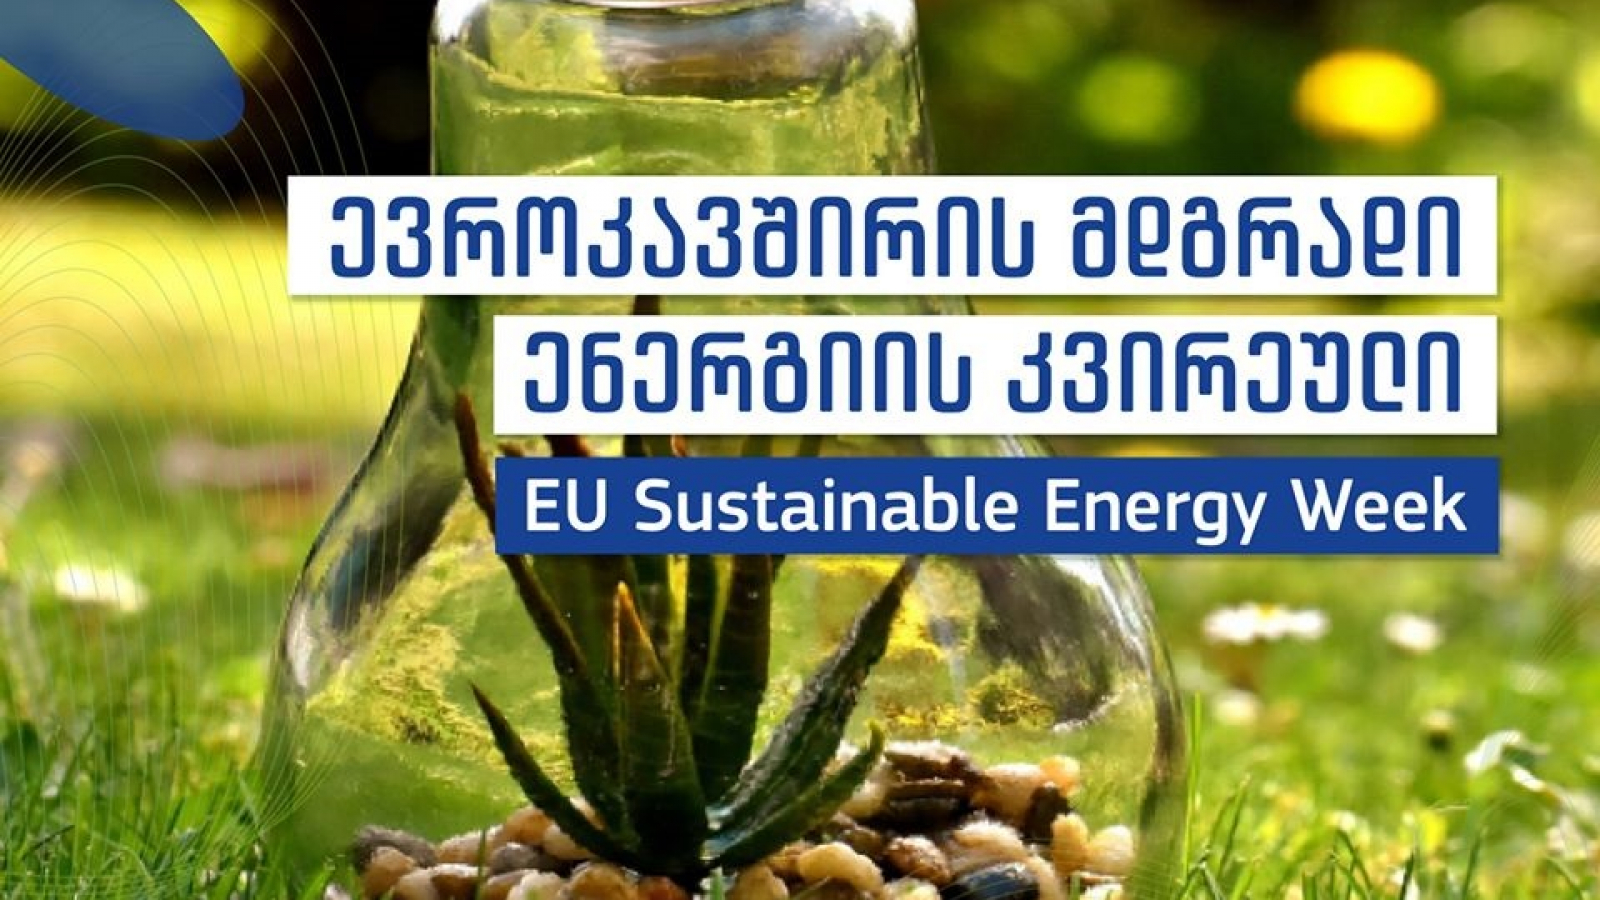 EU supports information campaign in Georgia for EU Sustainable Energy Week 2020